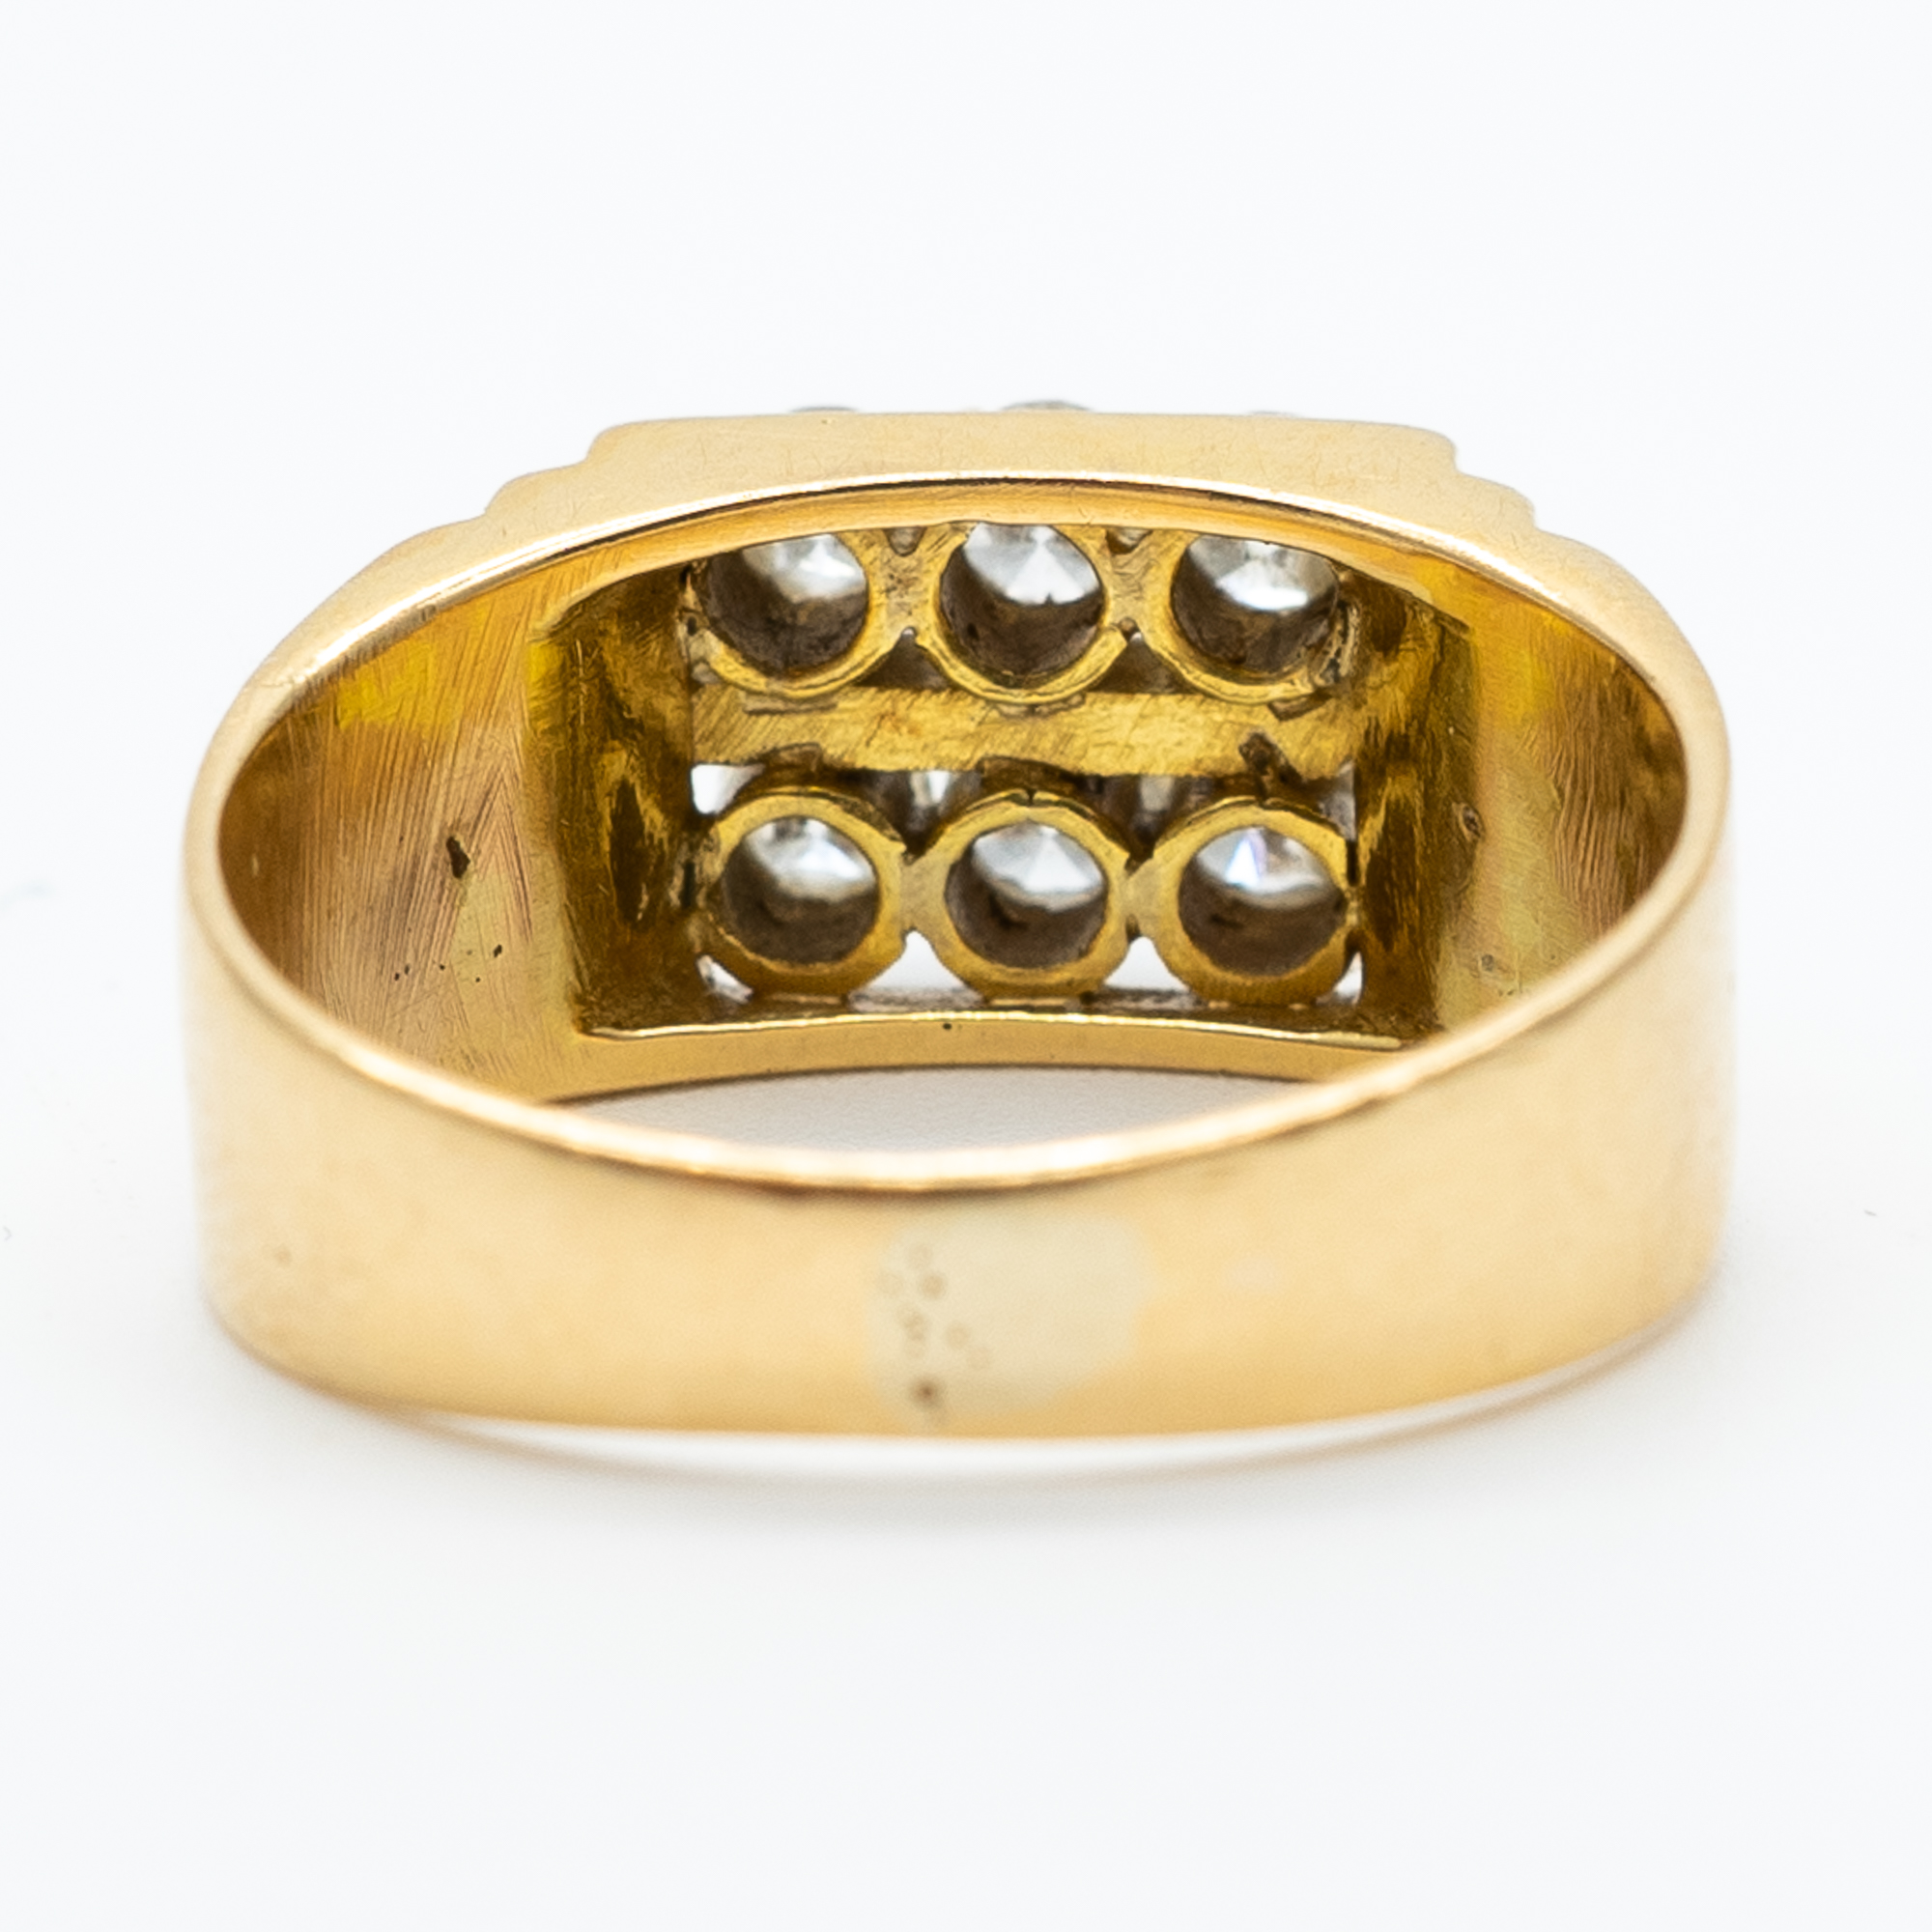 An 18ct yellow gold diamond signet ring - Image 3 of 4